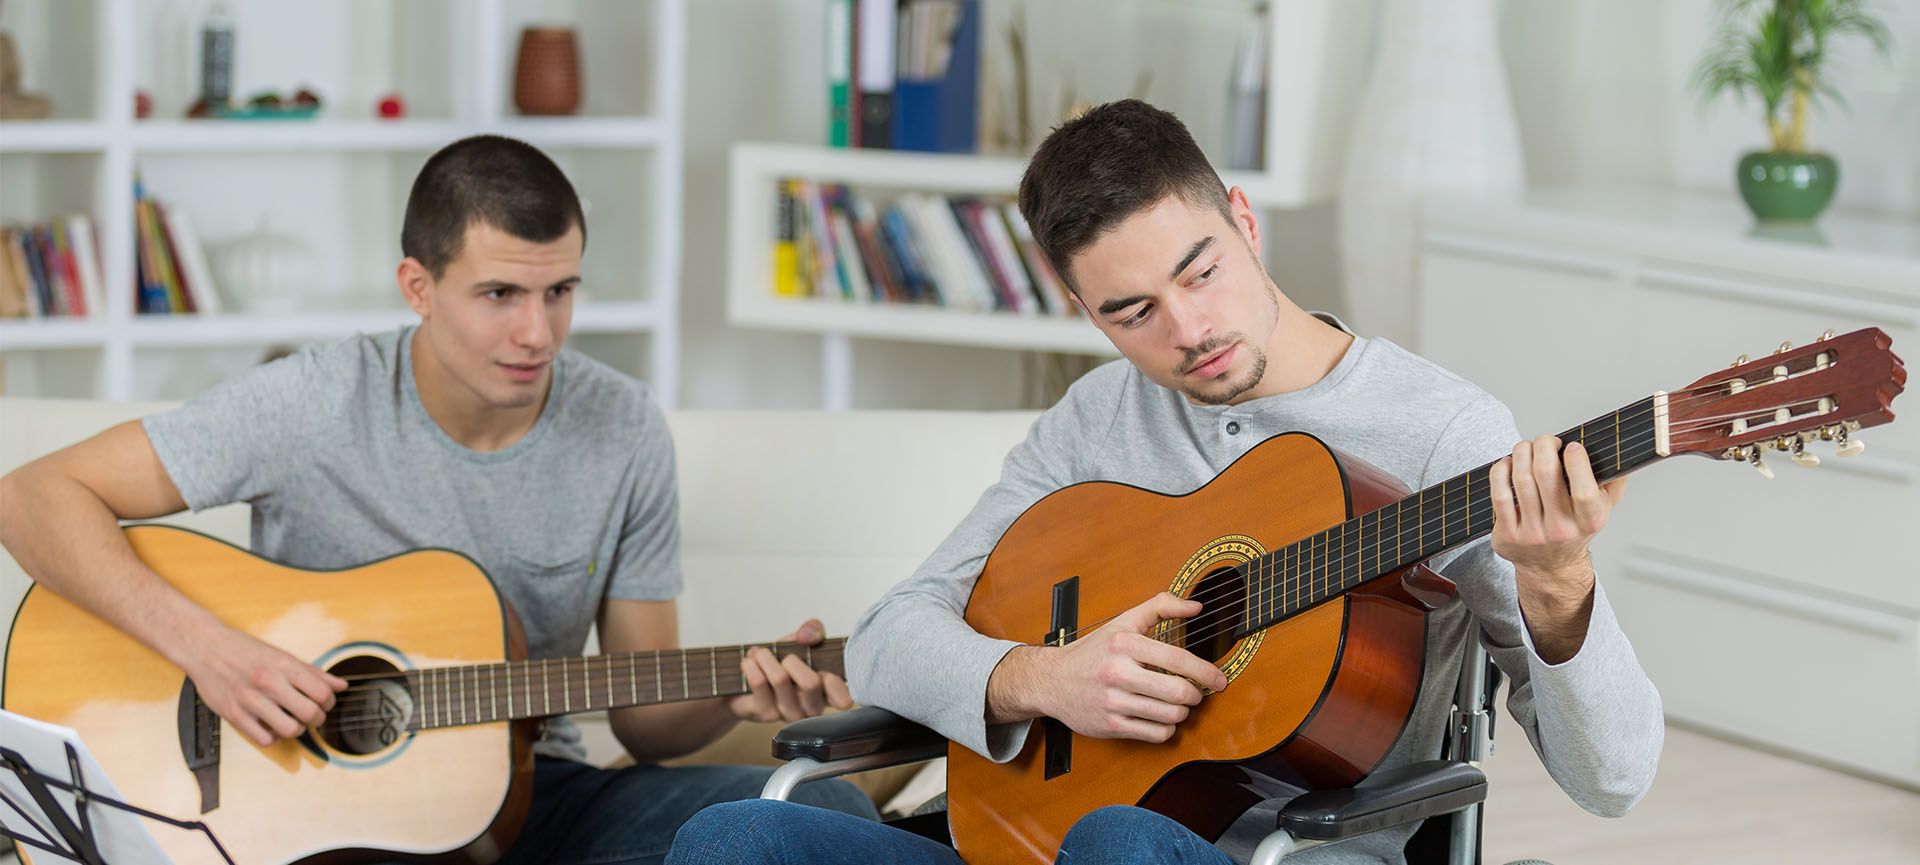 music therapy help with addiction treatment